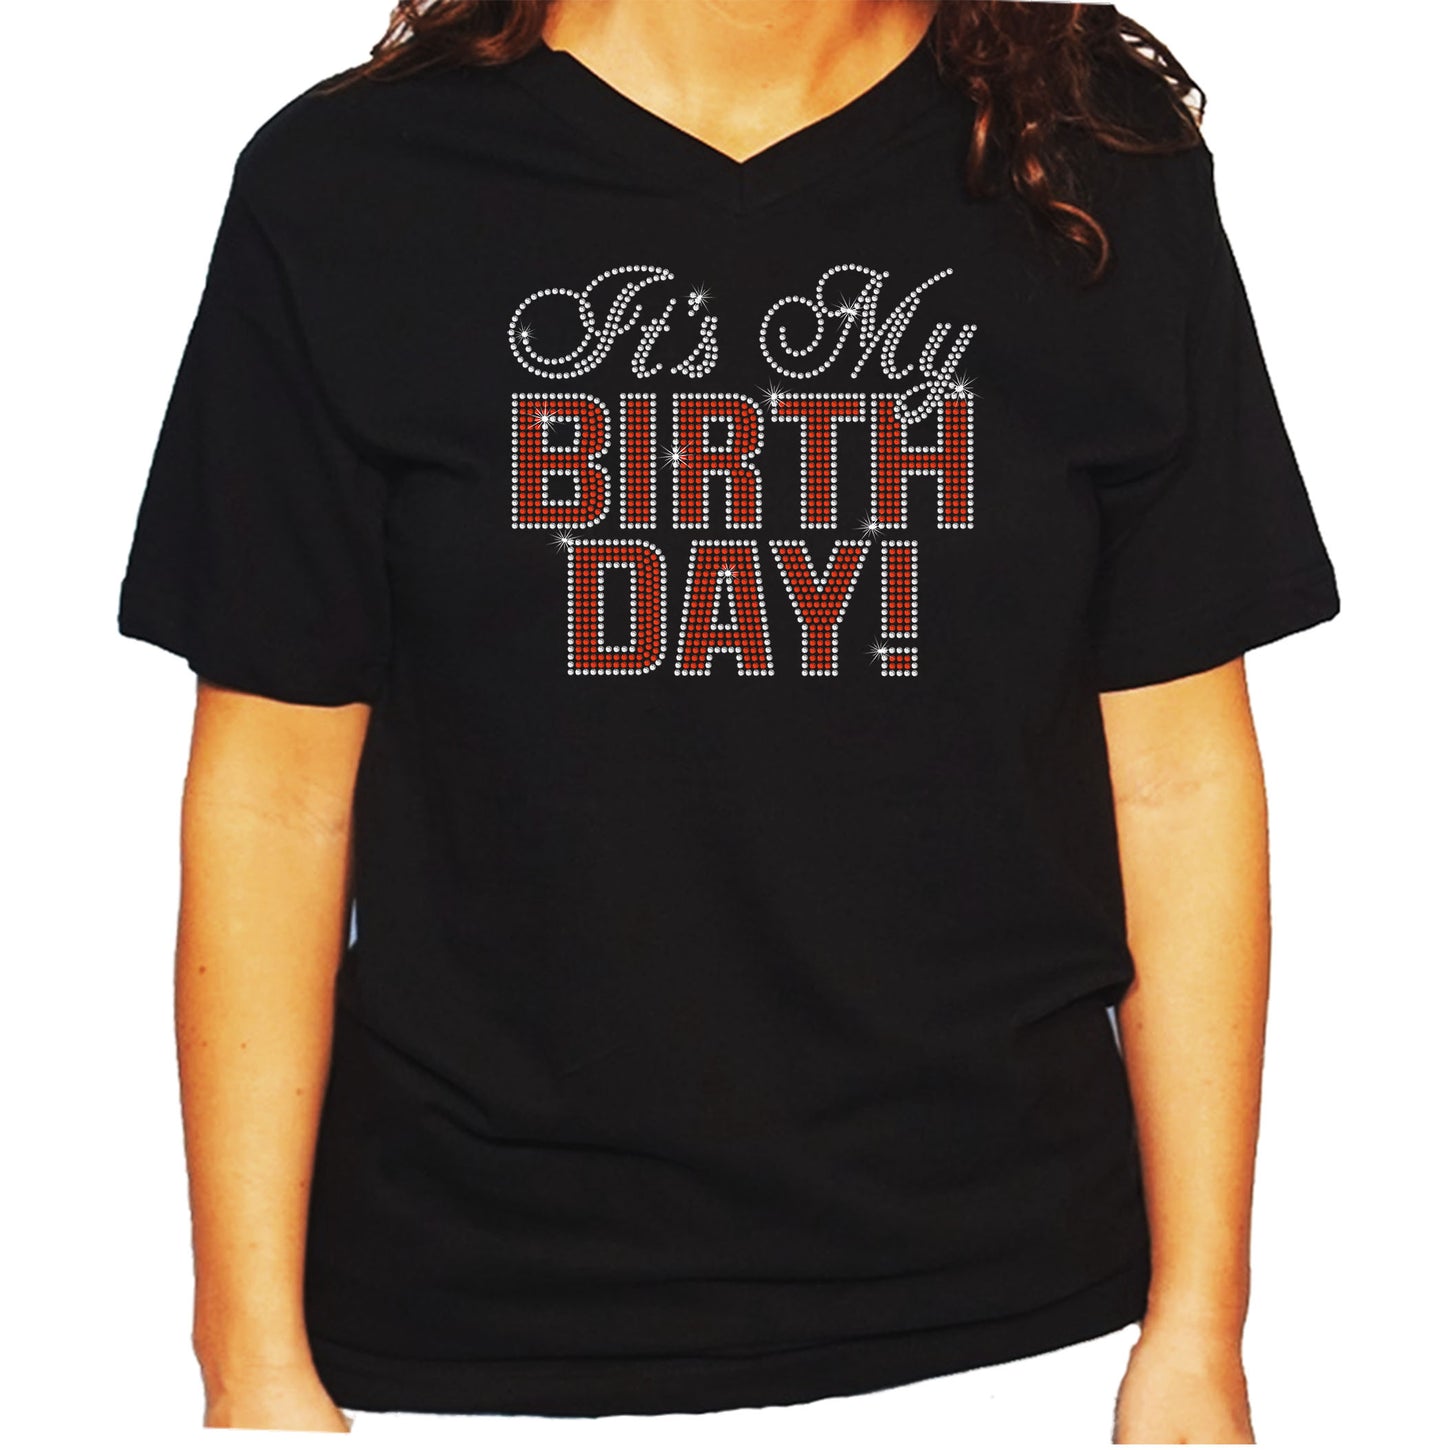 Women's/Unisex Rhinestone T-Shirt with It's My Birthday in Bold Letters